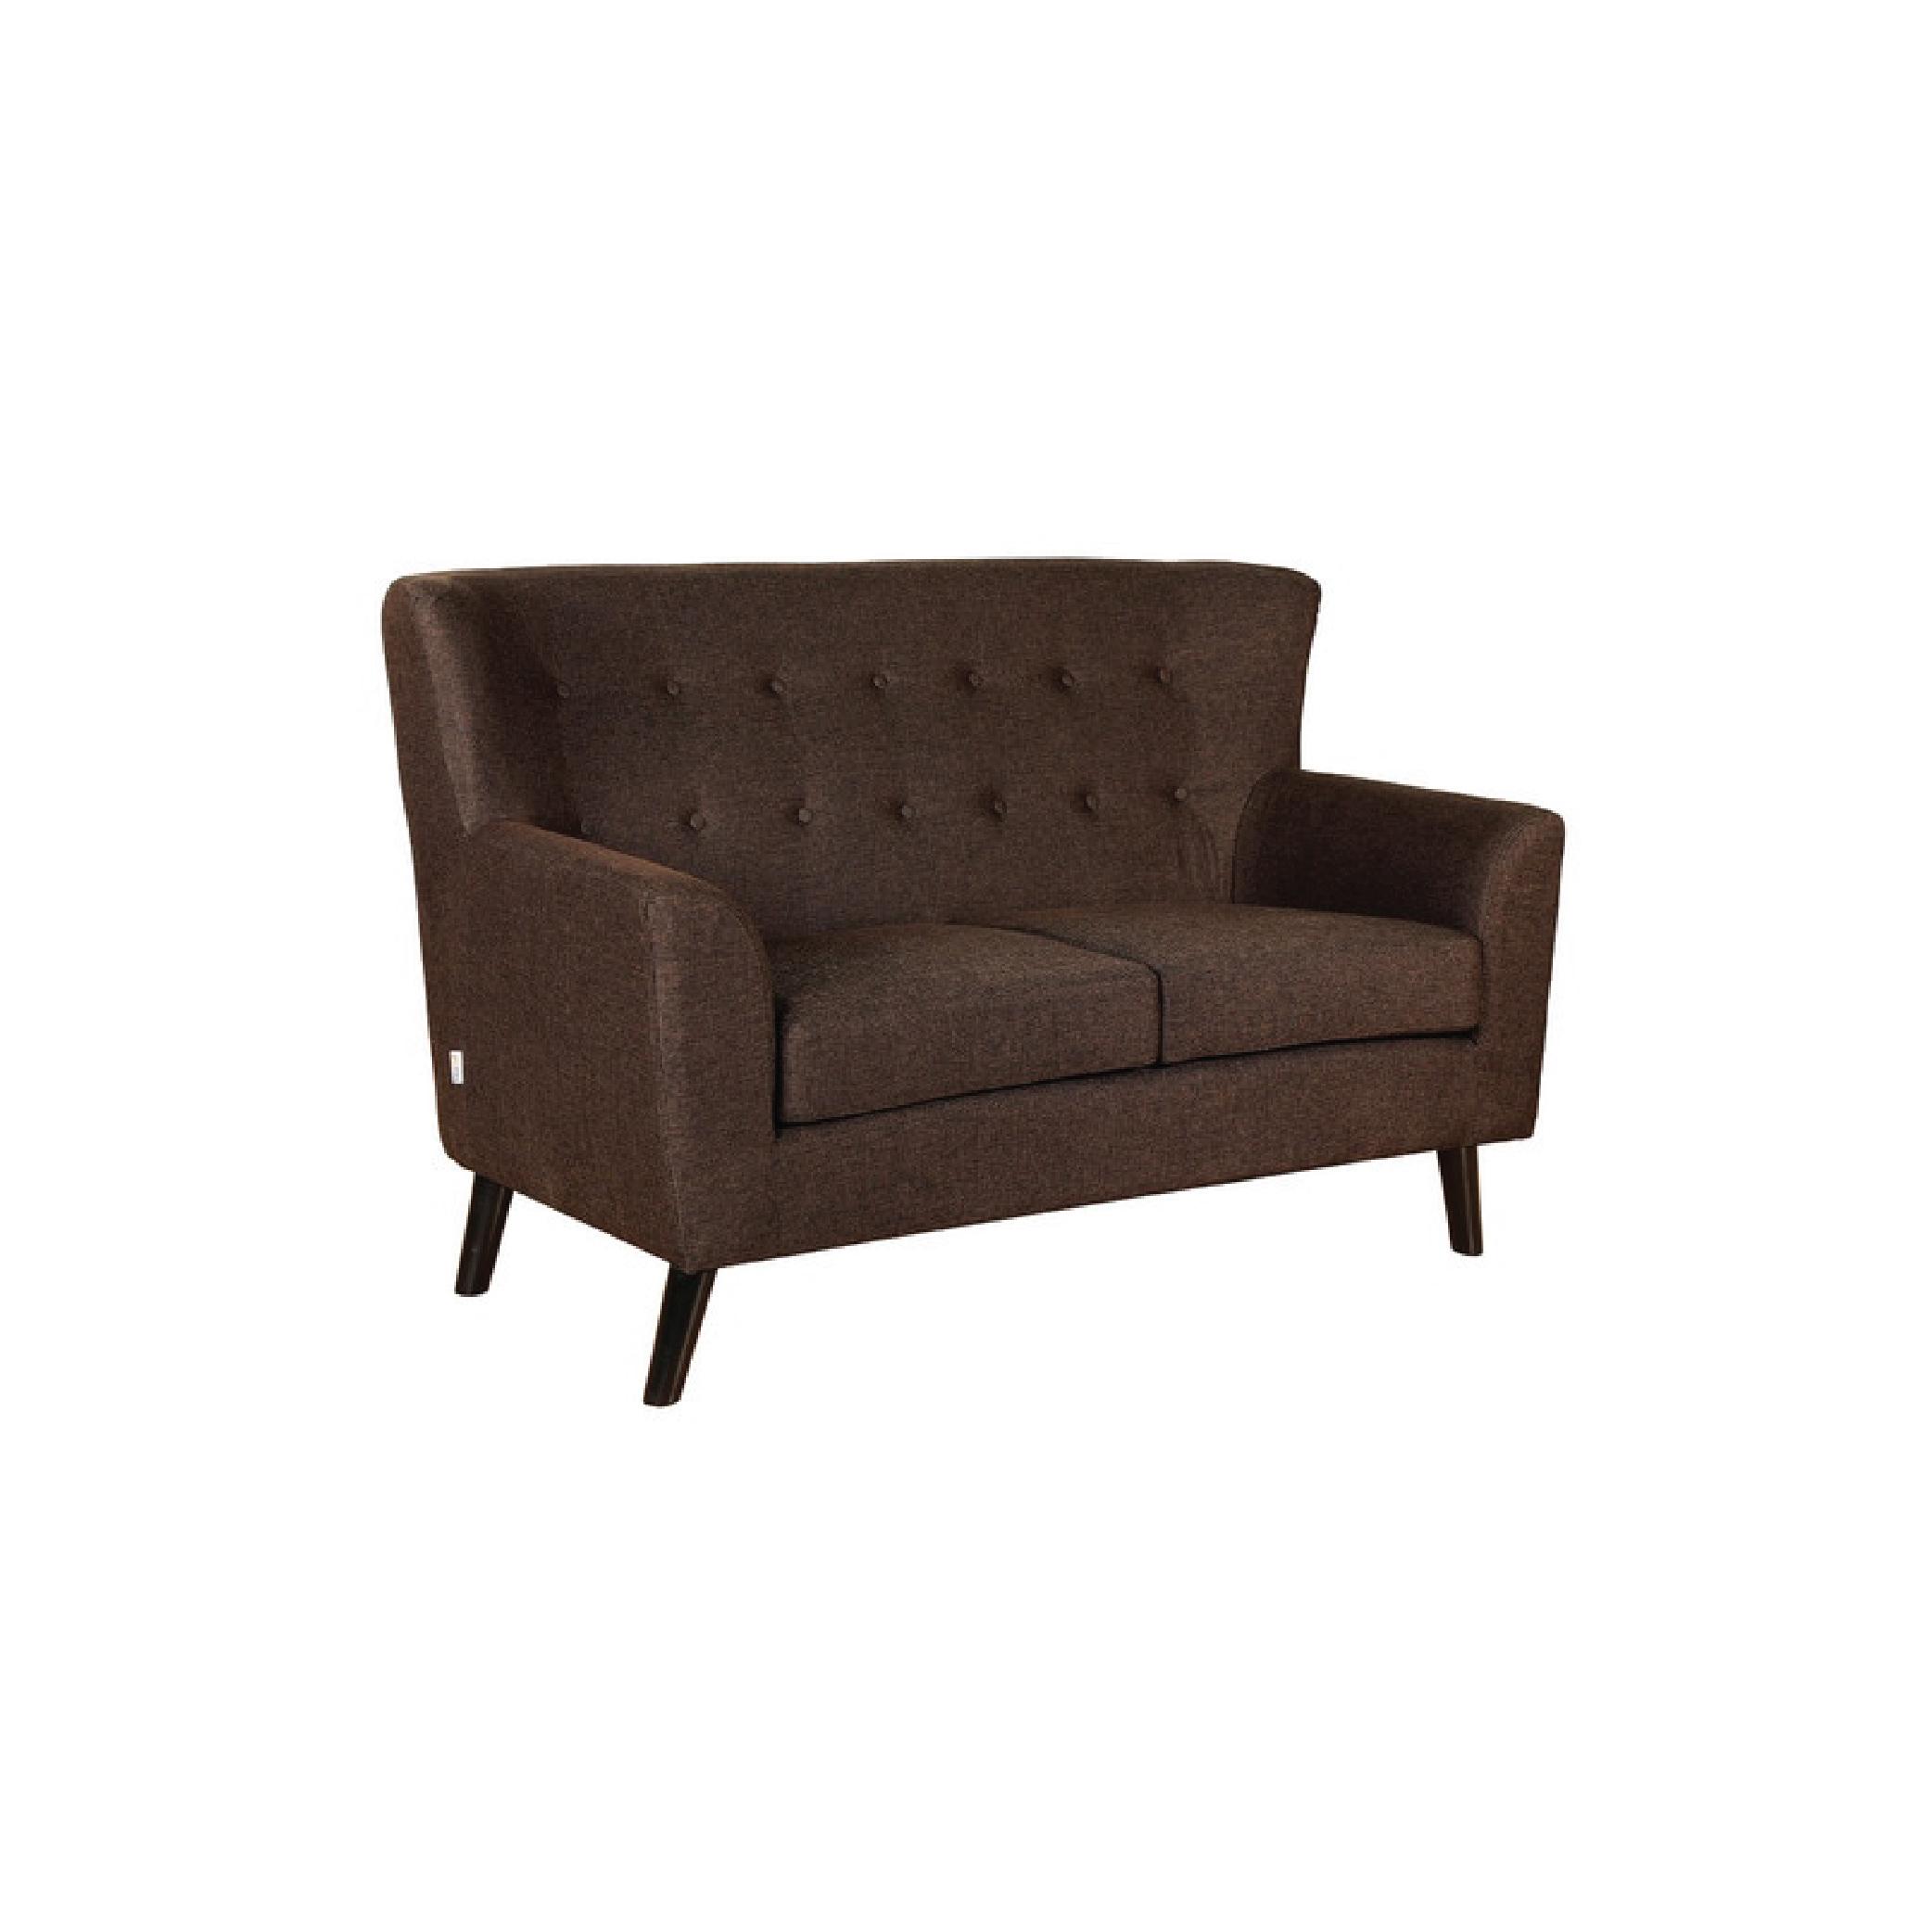 Torre Two Seater Sofa in Dark Brown Colour